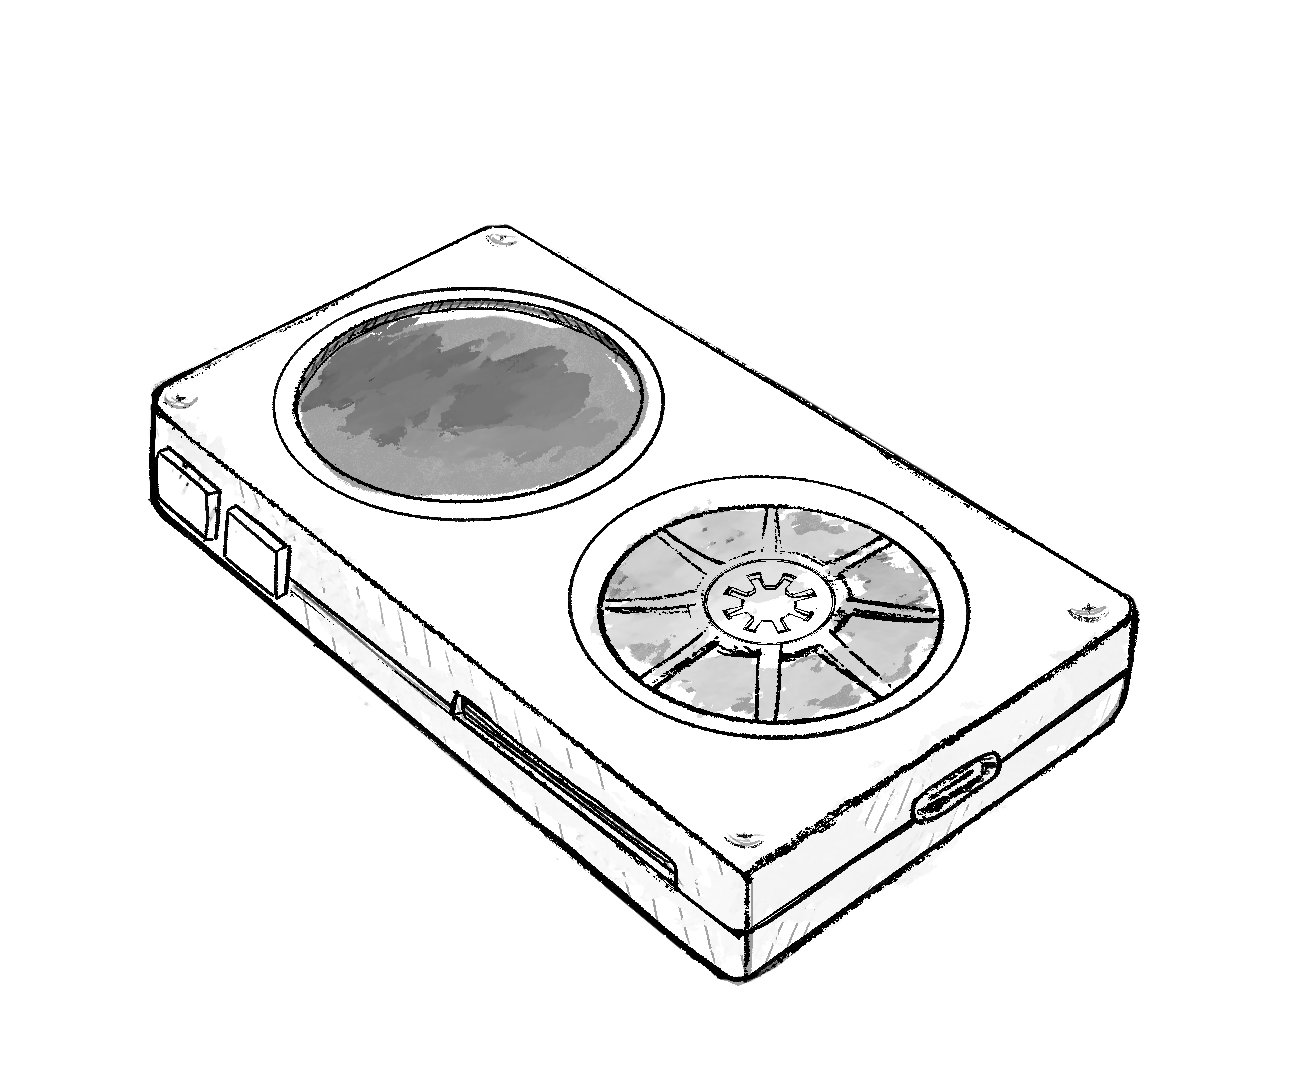 A concept sketch of a cassette tape-like music player, with a circular screen and 3D printed reel